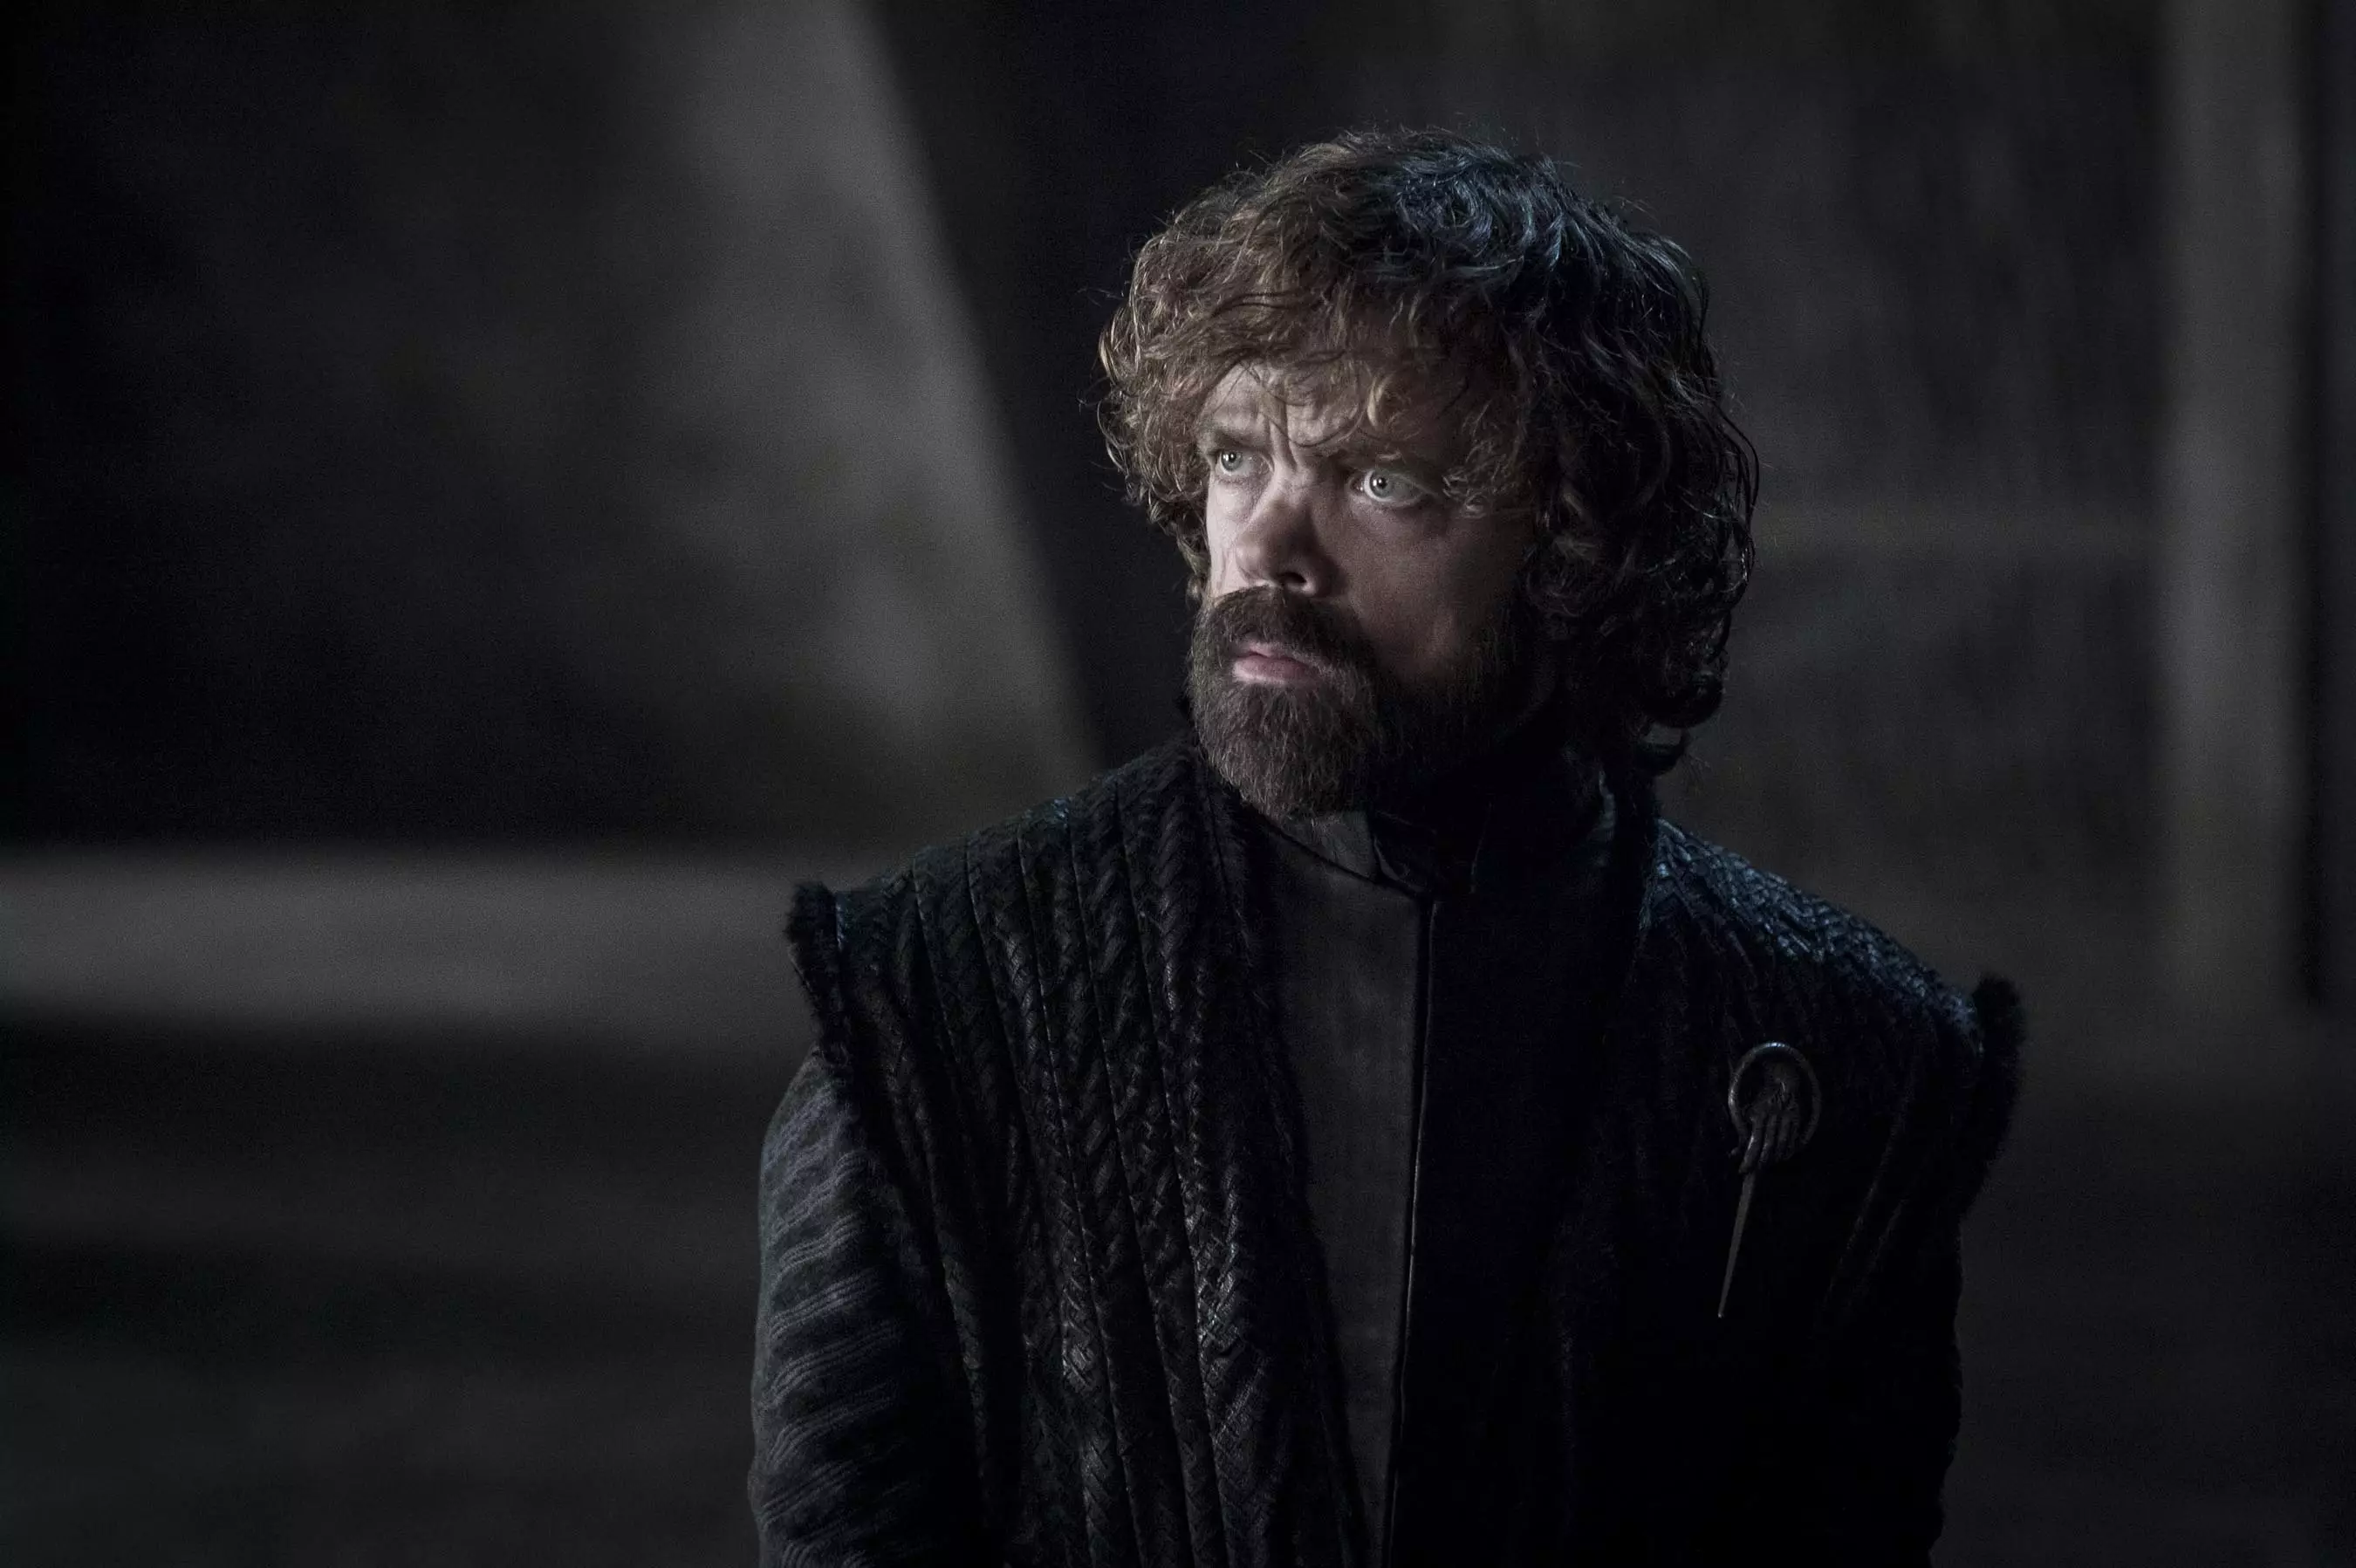 Is Tyrion on his last chance?